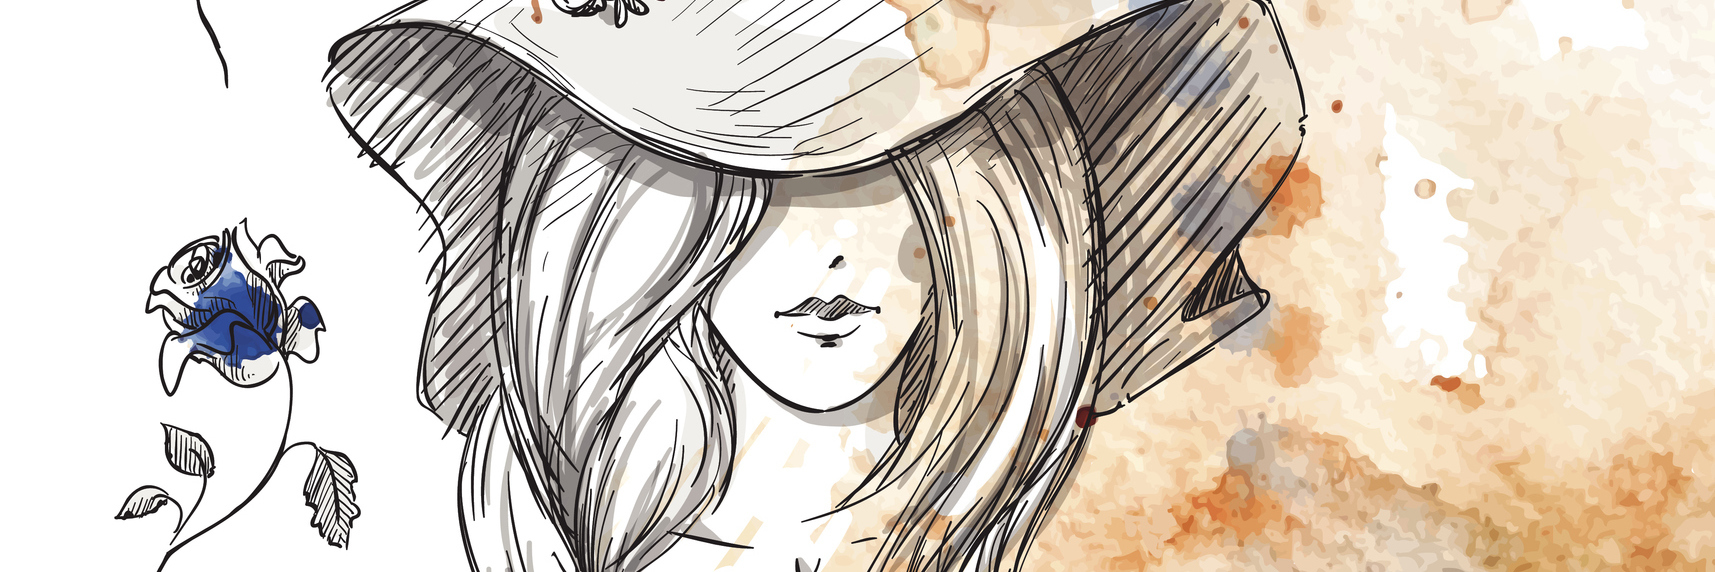 watercolor image of a girl wearing a hat